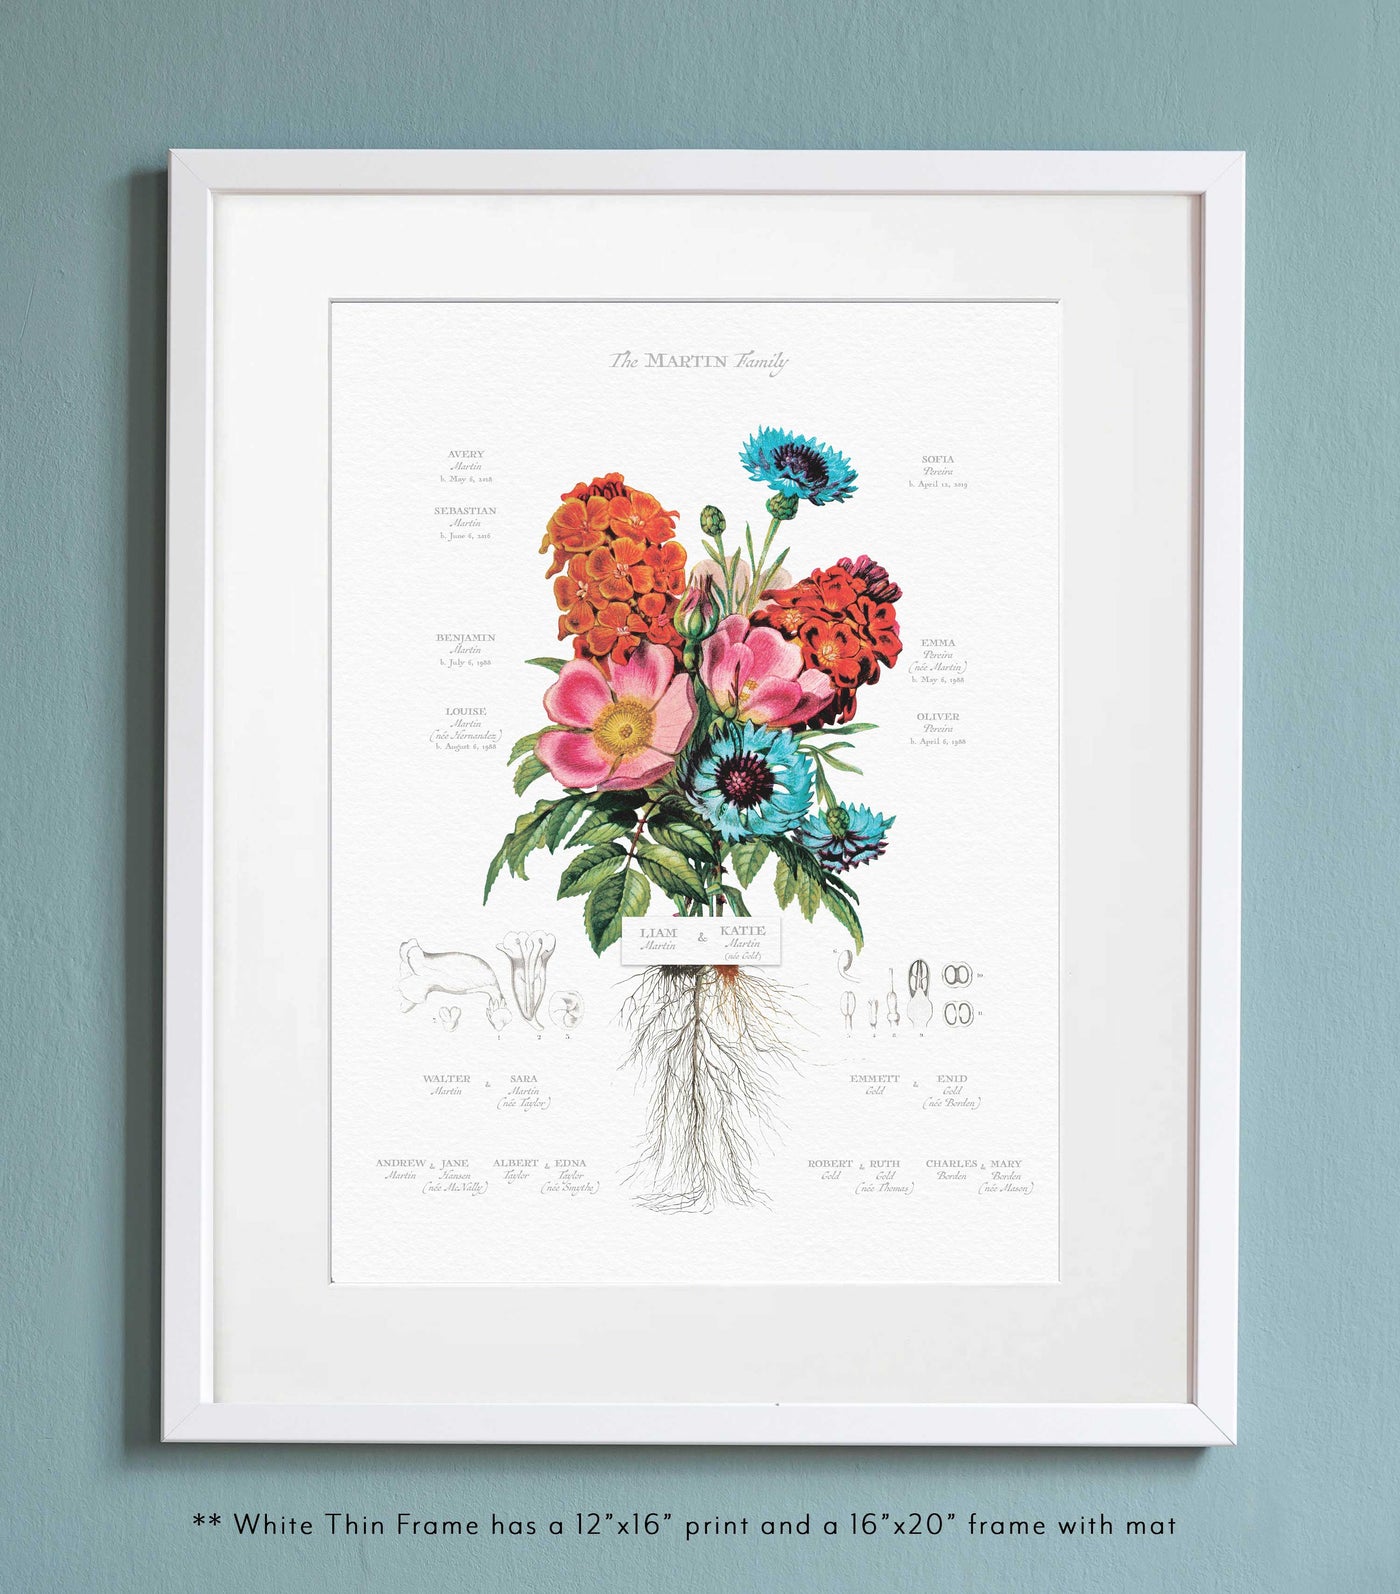 Dog Rose Bouquet Family Tree by Family Botanic in a thin white frame